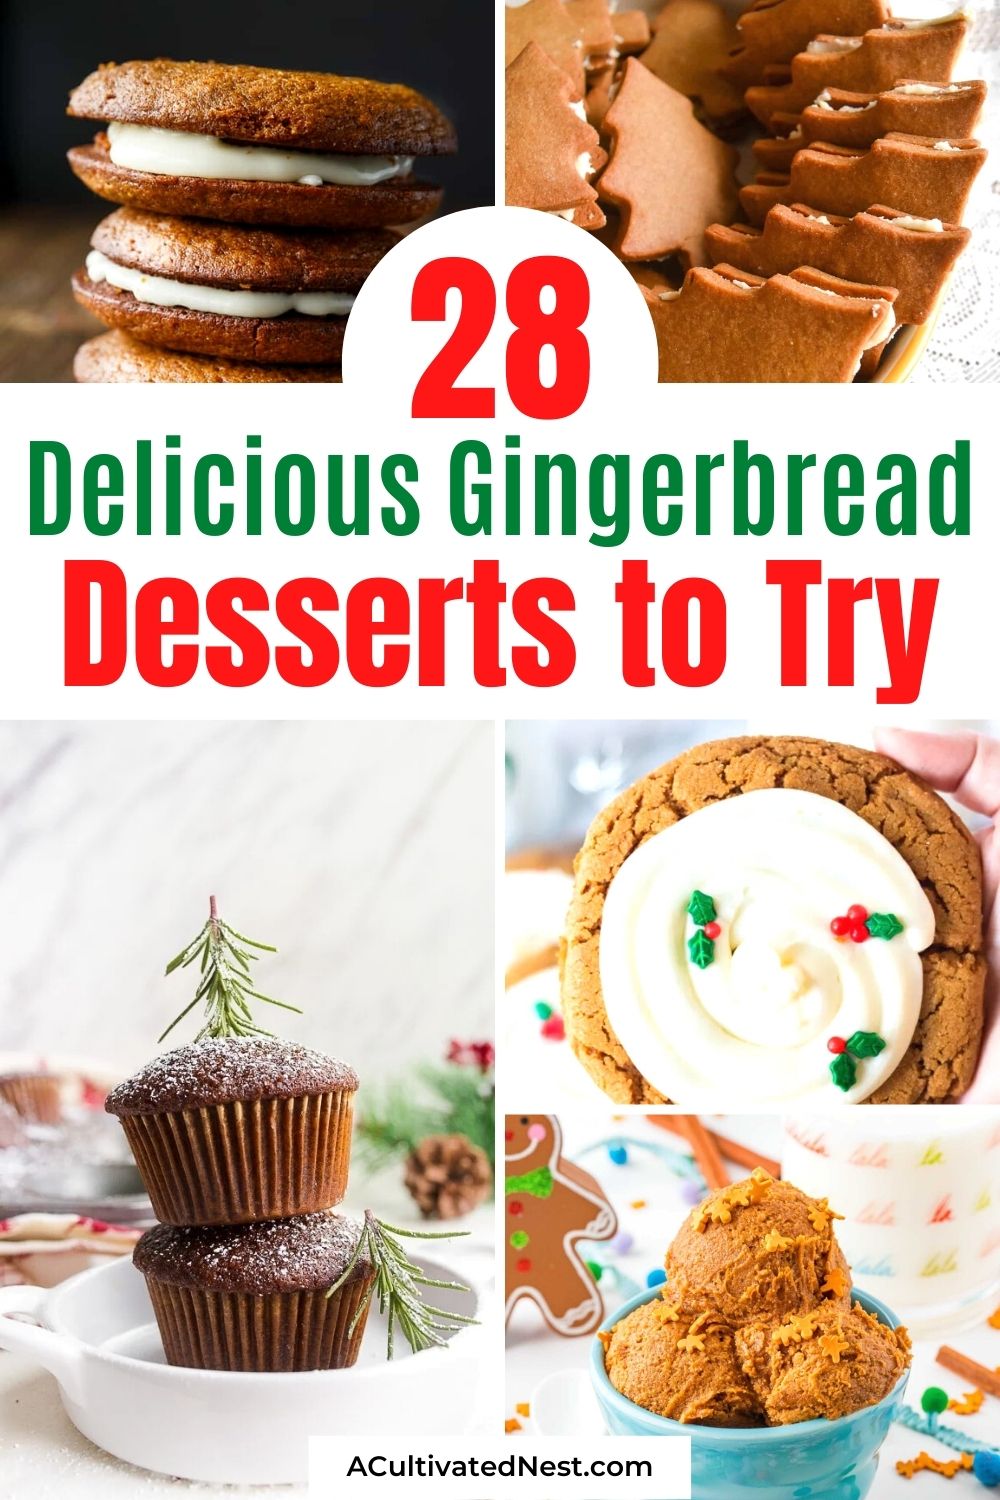 28 Gingerbread Treats Recipes to Try- Want some delicious ways to enjoy gingerbread this holiday season? Then you need to check out these tasty gingerbread treats recipes! There are so many delicious ways to eat gingerbread! | #gingerbread #recipes #holidayRecipes #ChristmasDesserts #ACultivatedNest